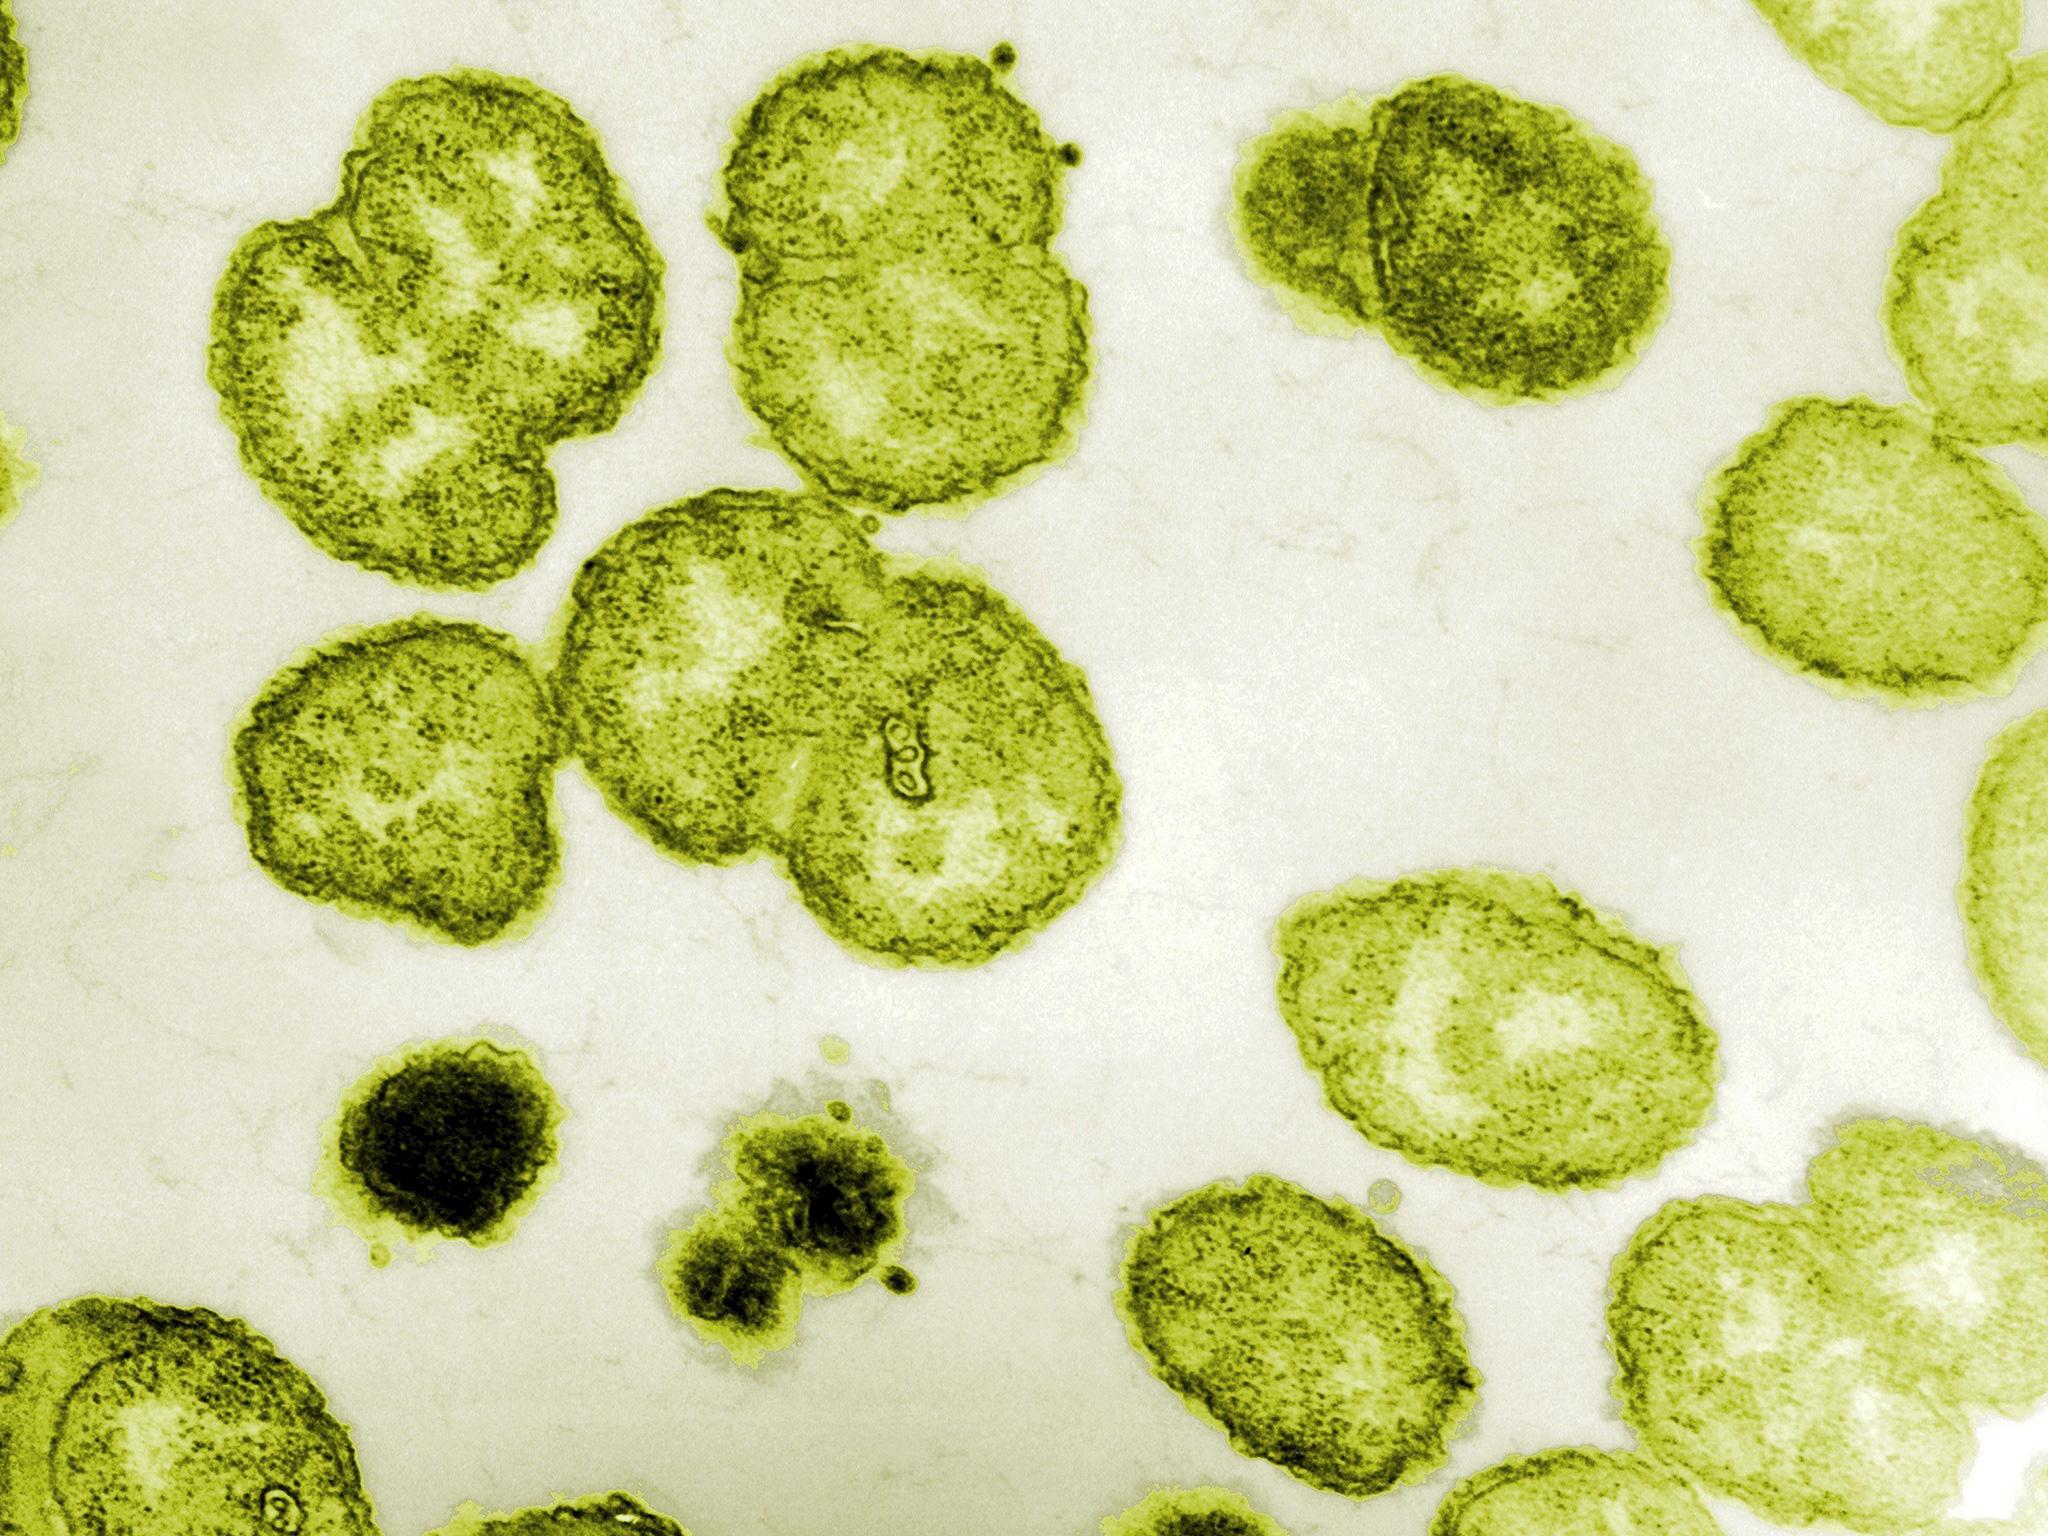 Sexually transmitted superbug warning as infections soar 26% in a year - The Independent thumbnail